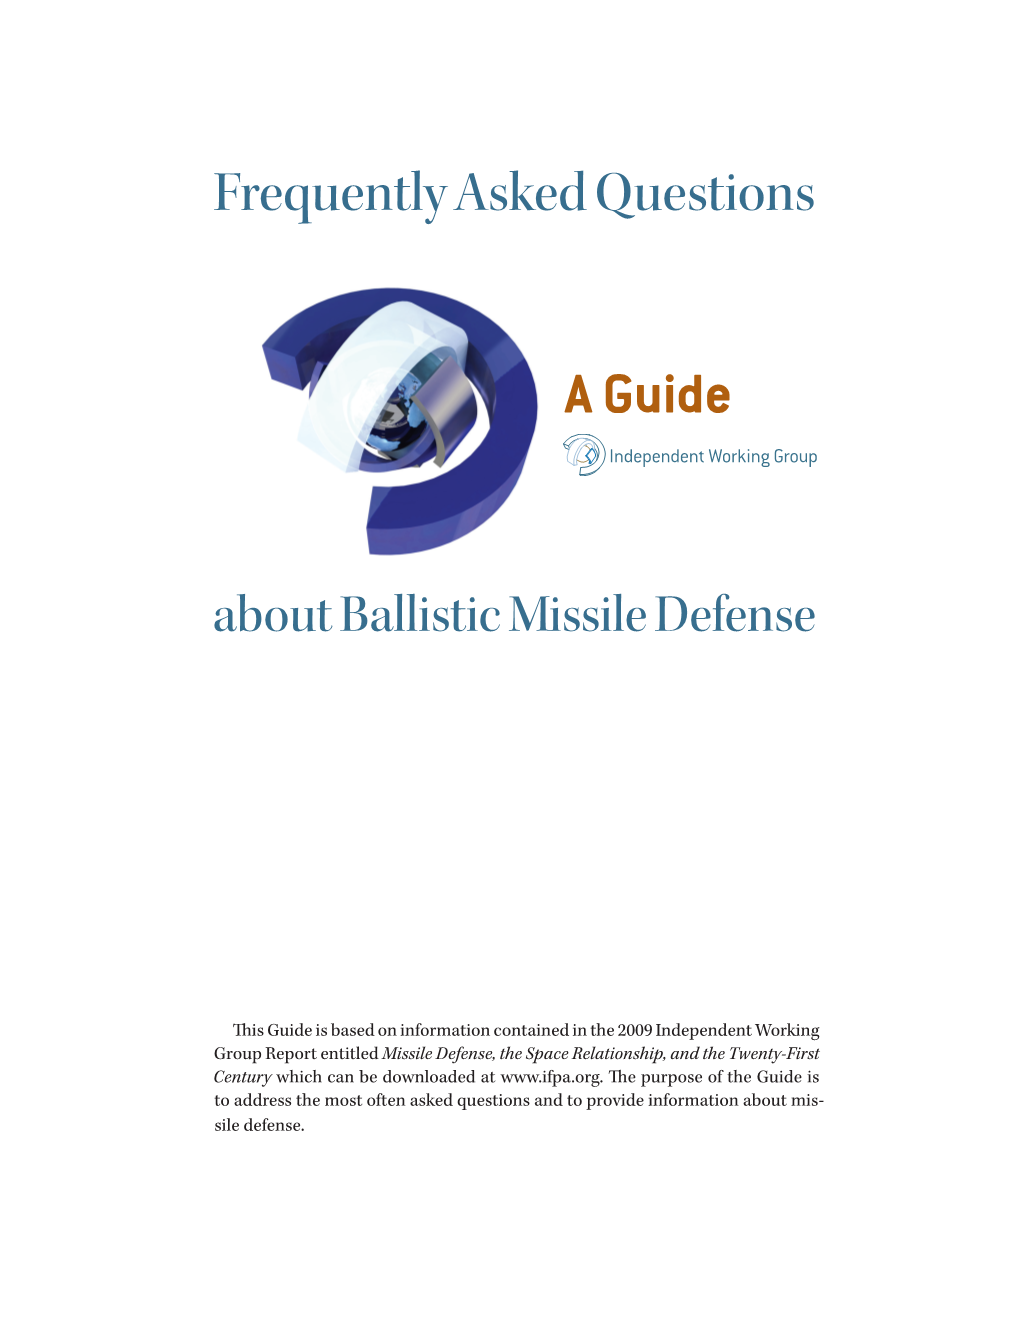 Frequently Asked Questions About Ballistic Missile Defense